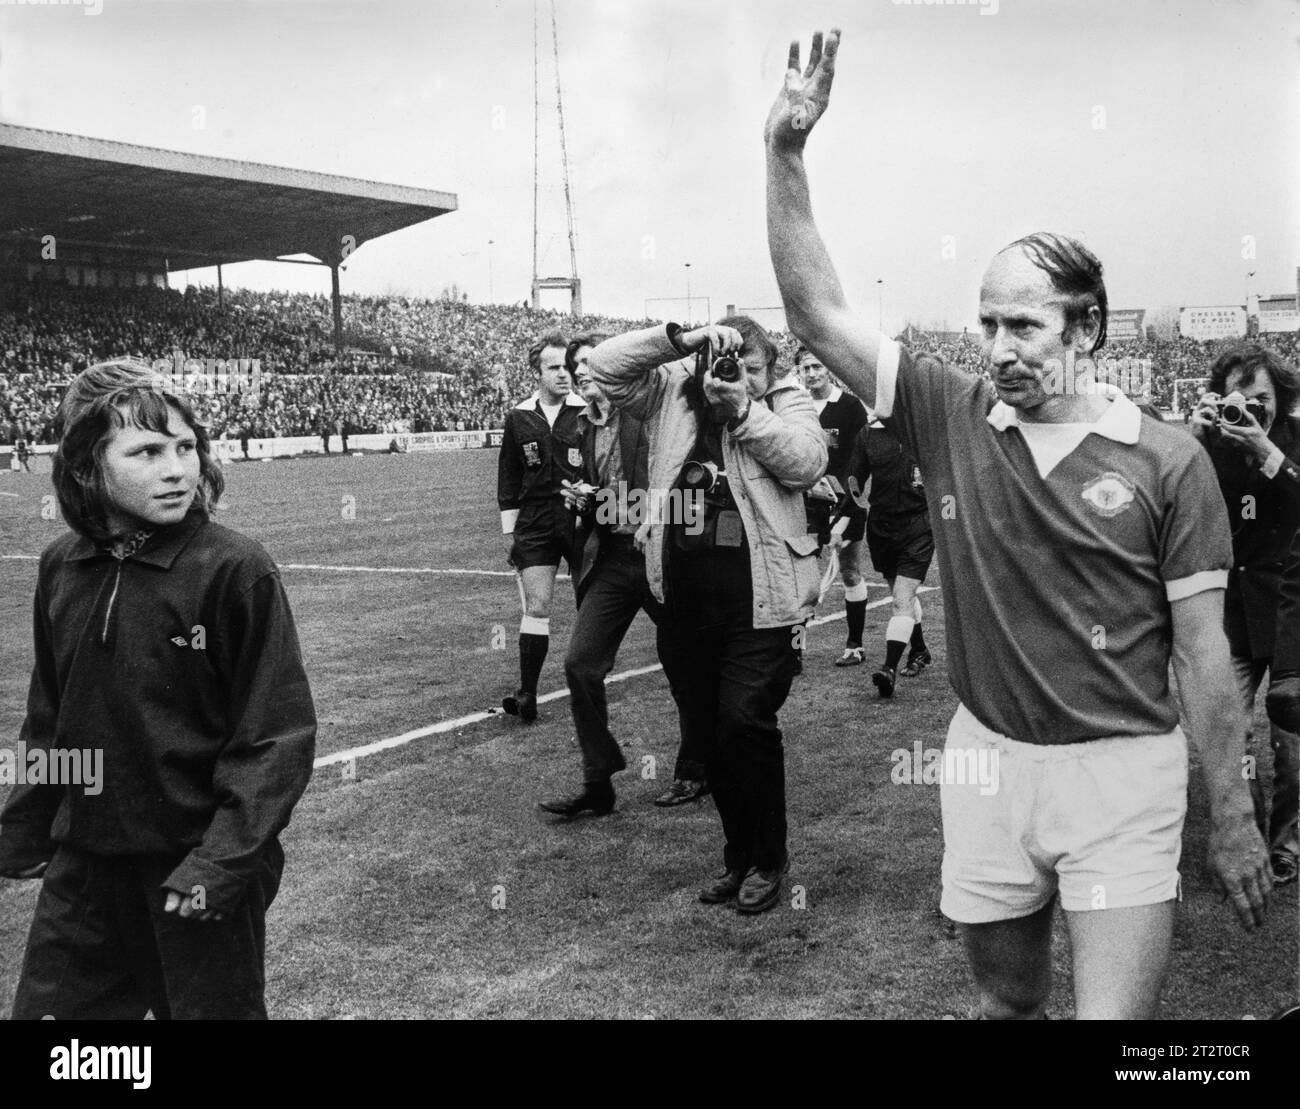 FILE: The death was announced today 21st October 2023 that Sir Bobby Charlton has died. Seen here as he waves to the crowd at the end of his last match when his team Manchester United lost to Chelsea 1-0 at Stamford Bridge. 28 April 1973 Sir Robert Charlton, CBE (born 11 October 1937) is an English former footballer who played as a midfielder. He is regarded as one of the greatest players of all time,[6] and an essential member of the England team who won the World Cup in 1966, the year he also won the Ballon d'Or. Credit: BRIAN HARRIS/Alamy Live News Stock Photo